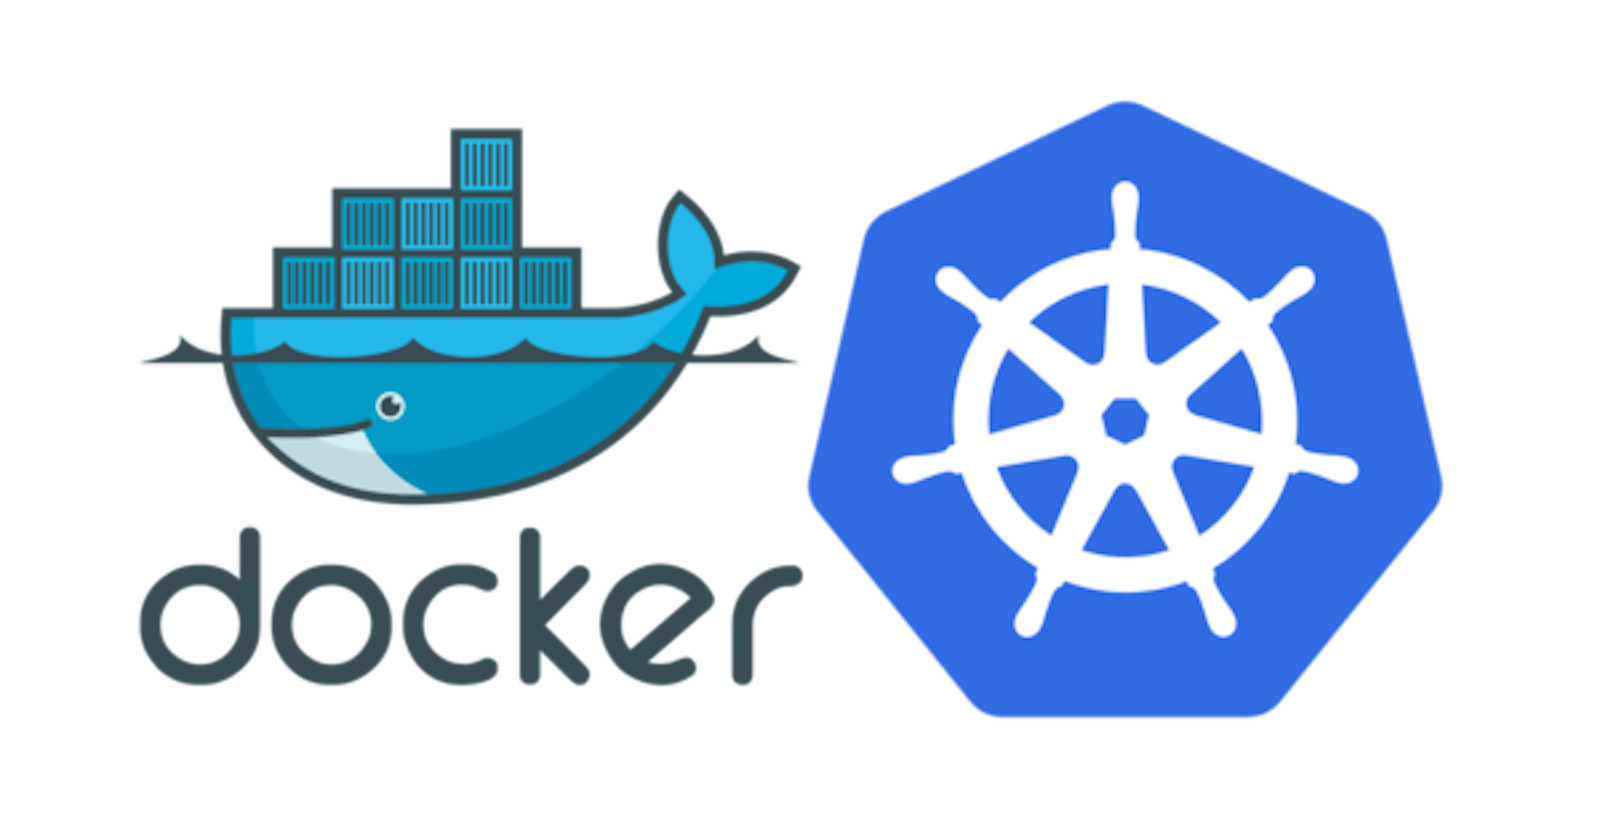 “Docker and Kubernetes: A Beginner’s Guide to Containerization and Orchestration”